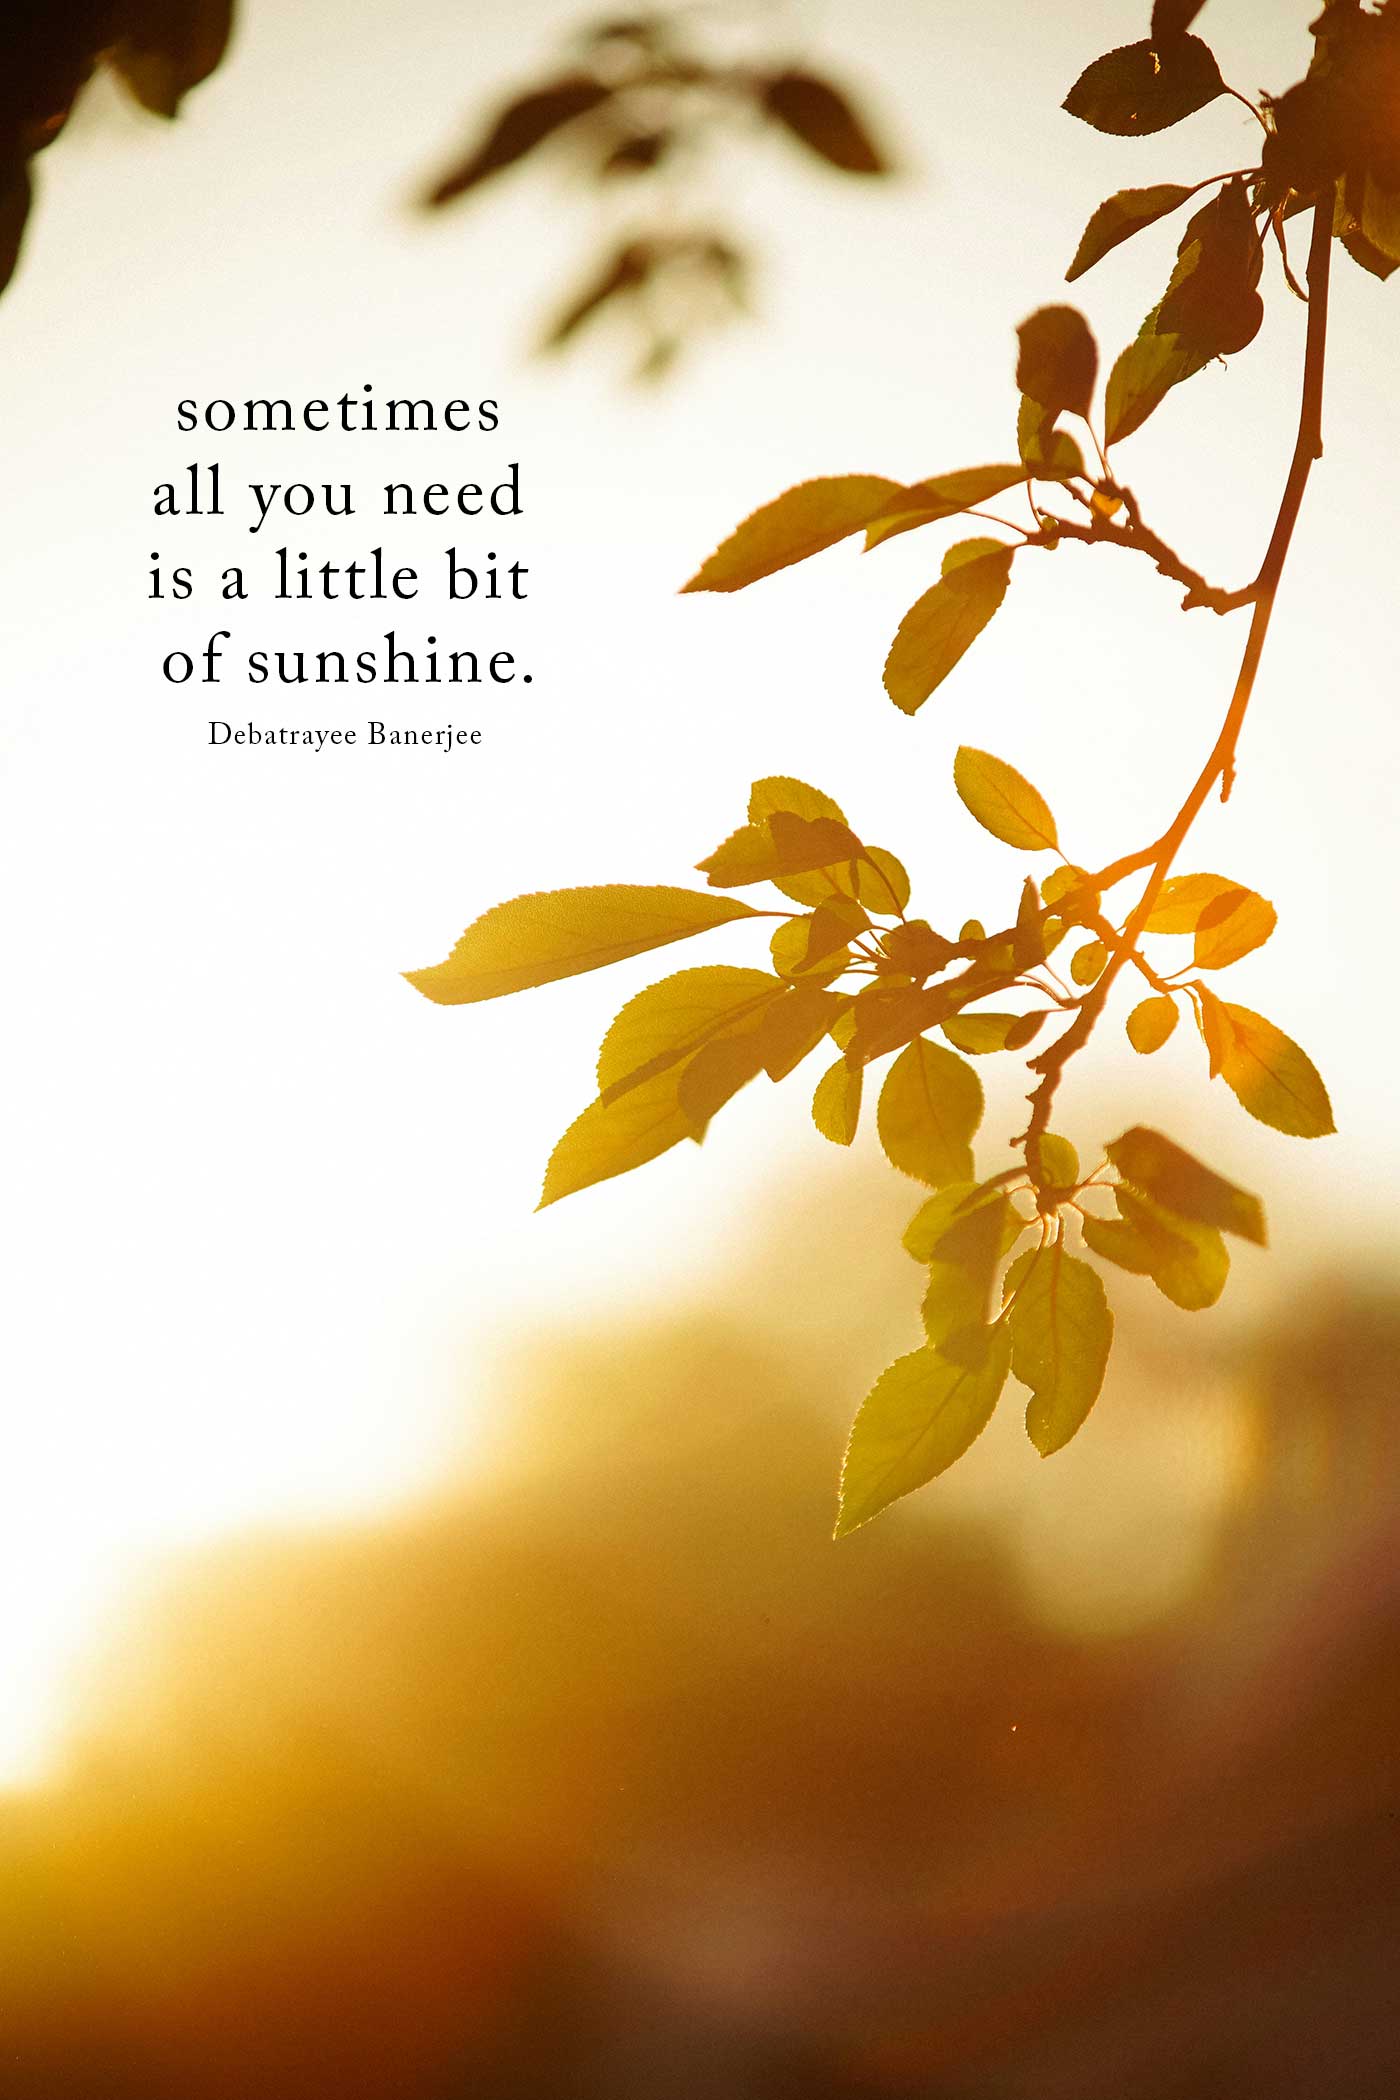 sunshine quote and spring buds